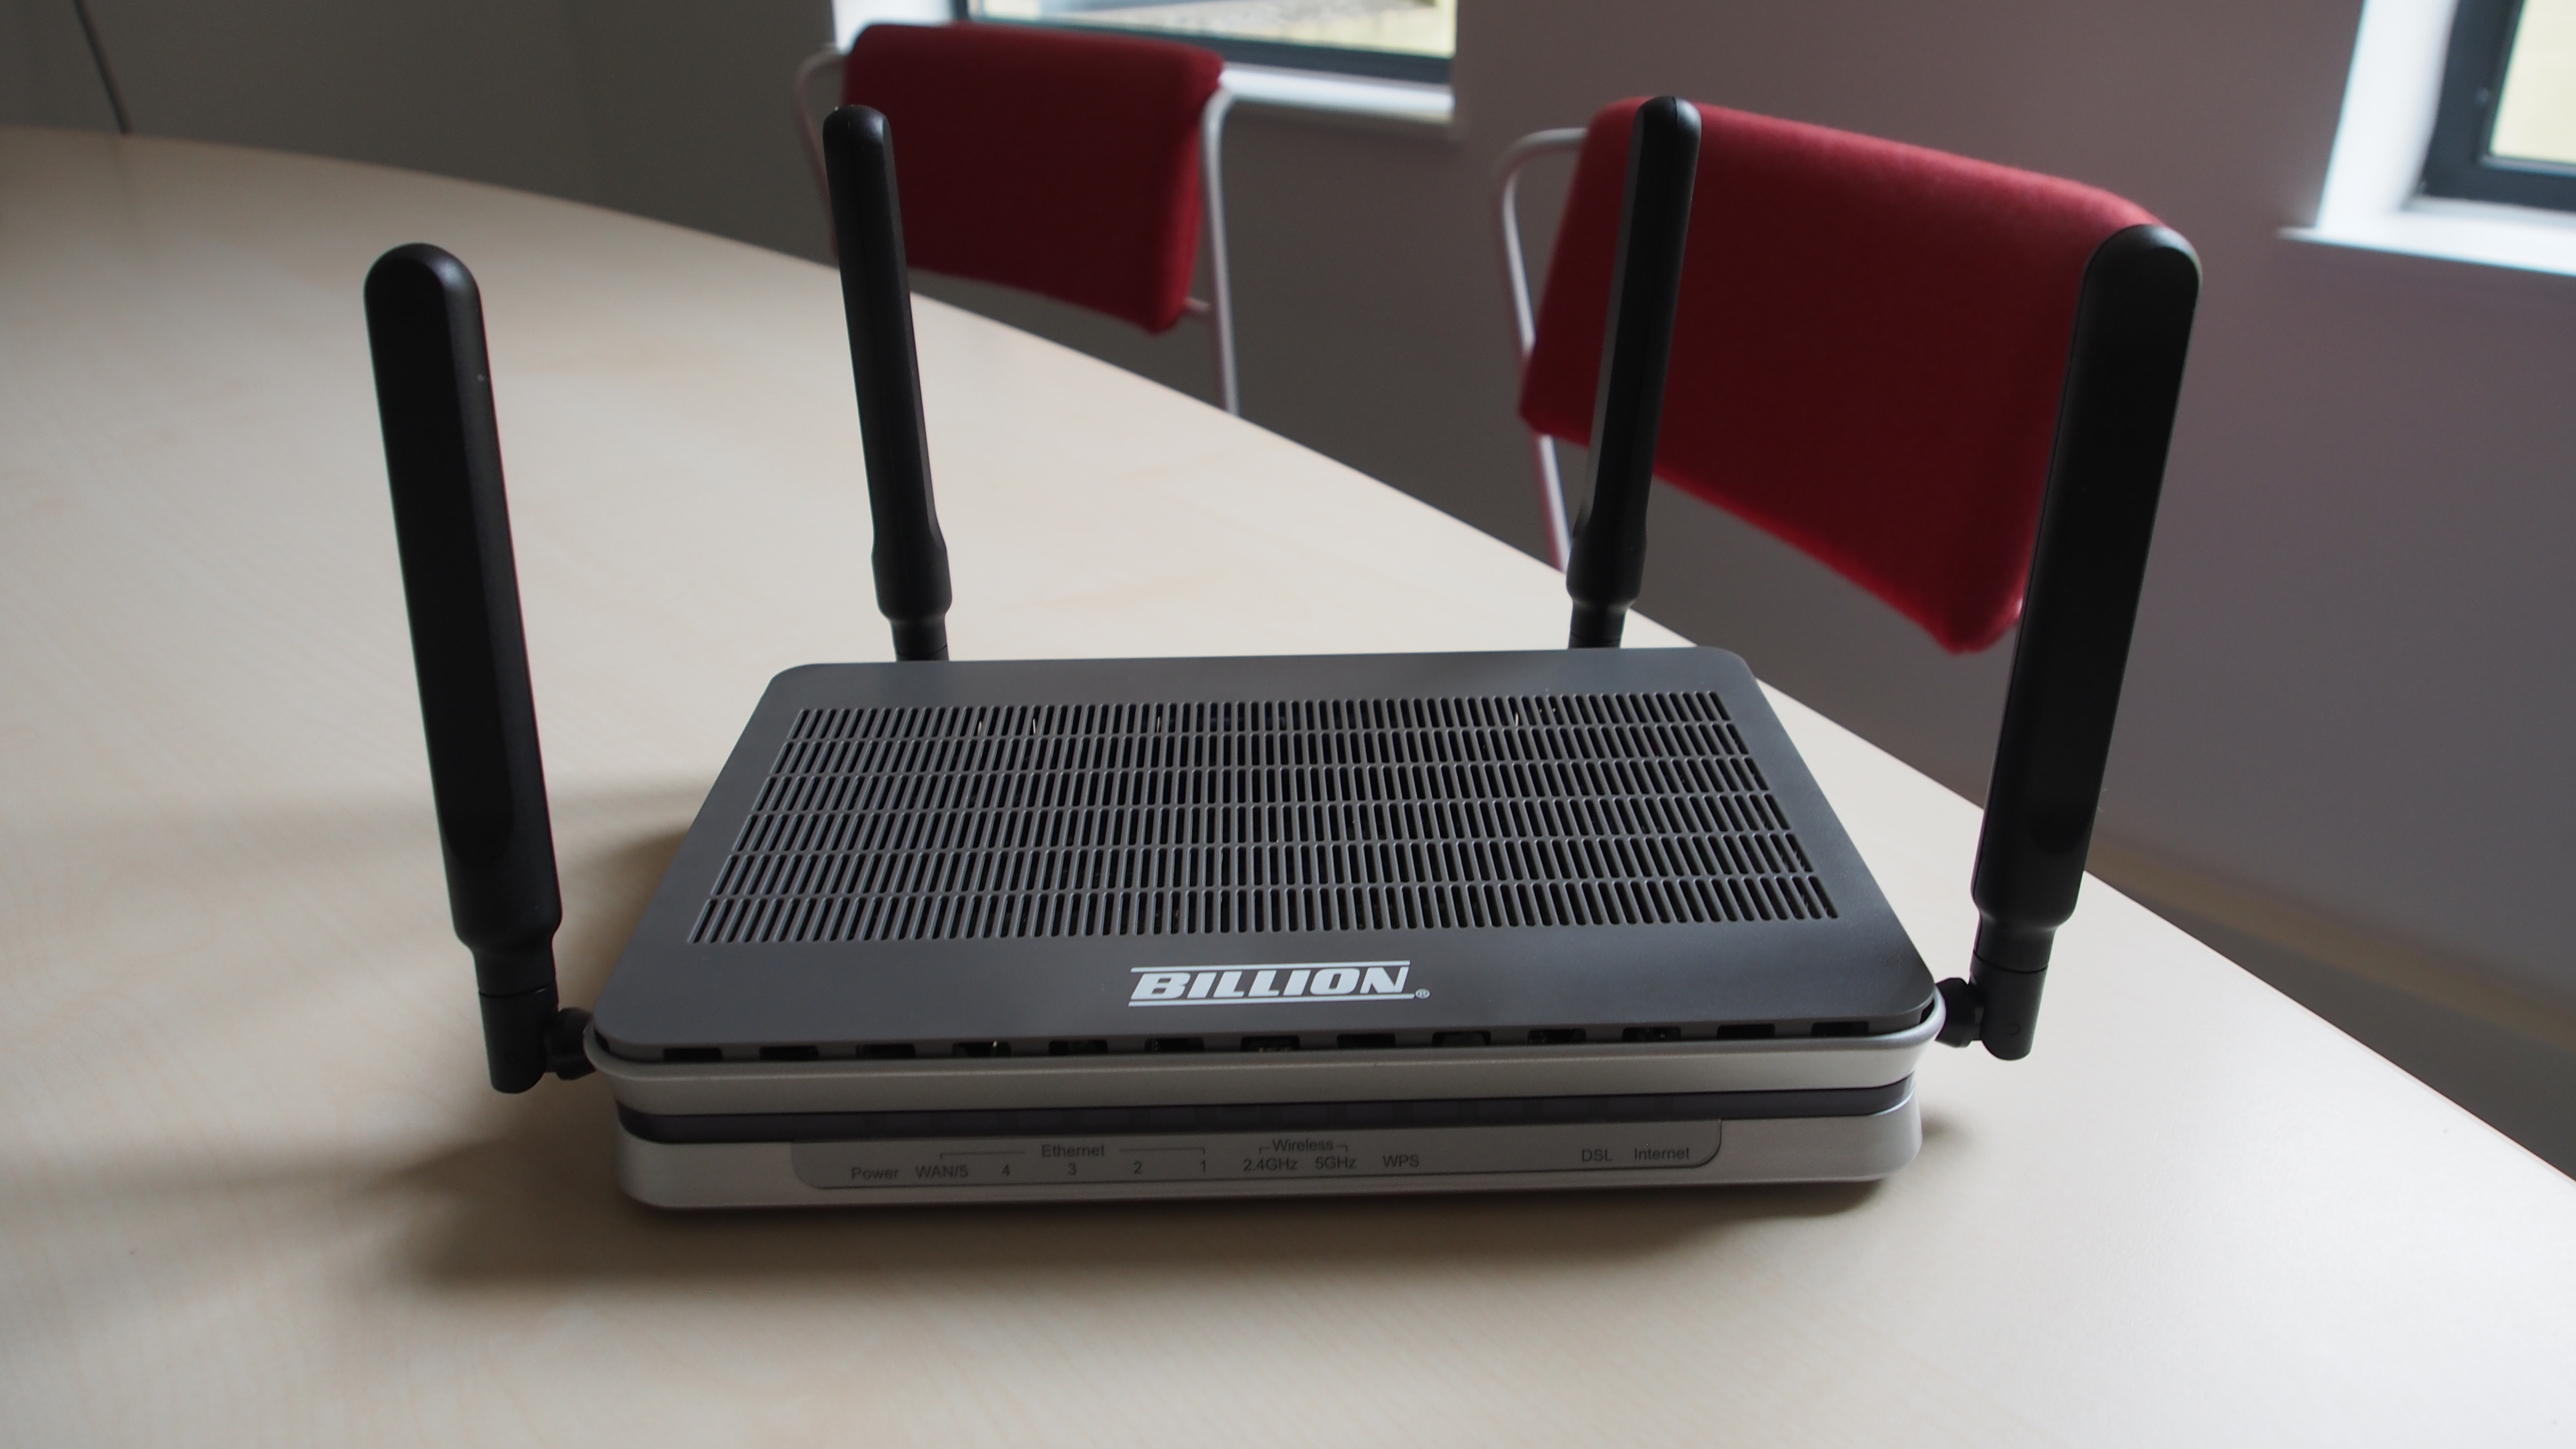 The best wireless business routers of 2018 - CAMPUS94